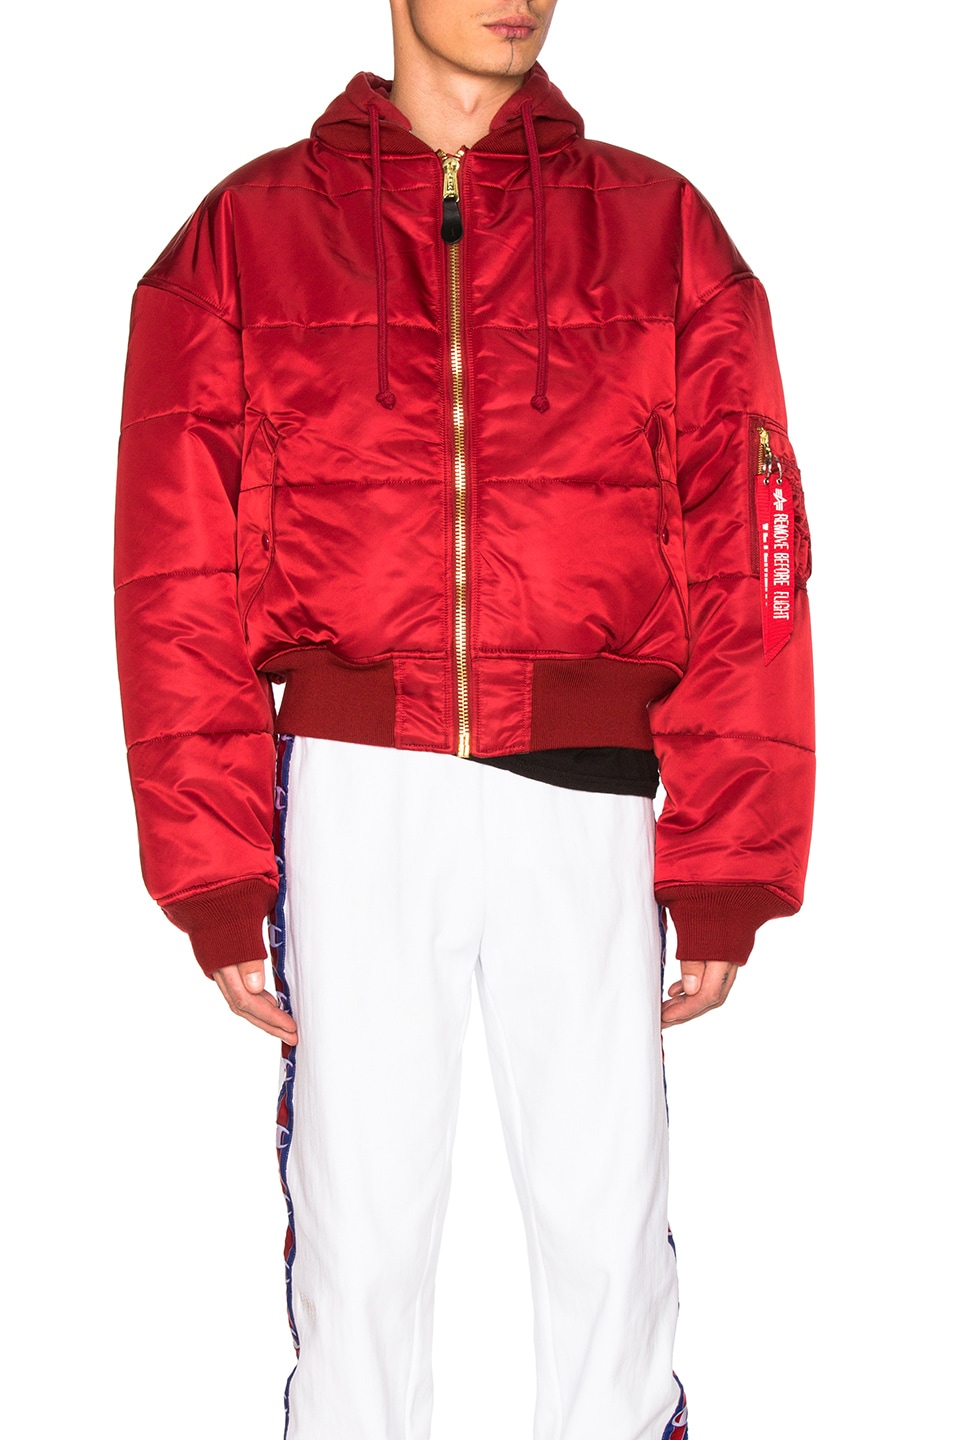 Image 1 of VETEMENTS x Alpha Industries Reversible Bomber Jacket in Red & Silver